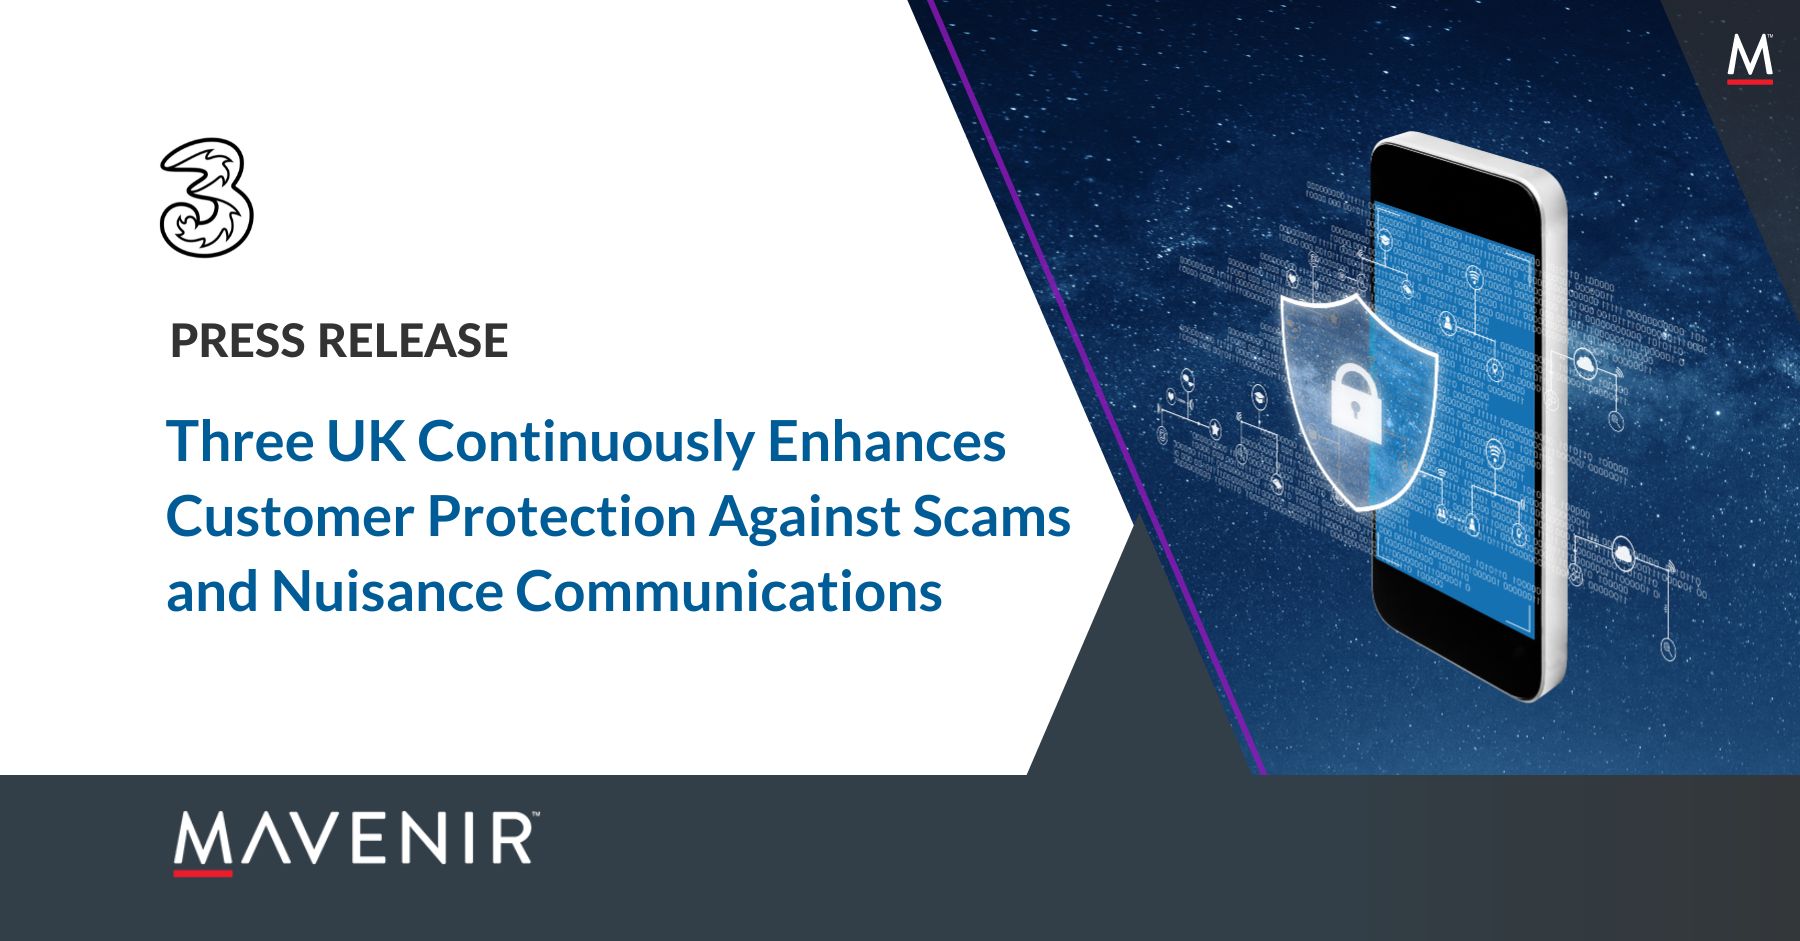 Three UK Continuously Enhances Customer Protection Against Scams and Nuisance Communications